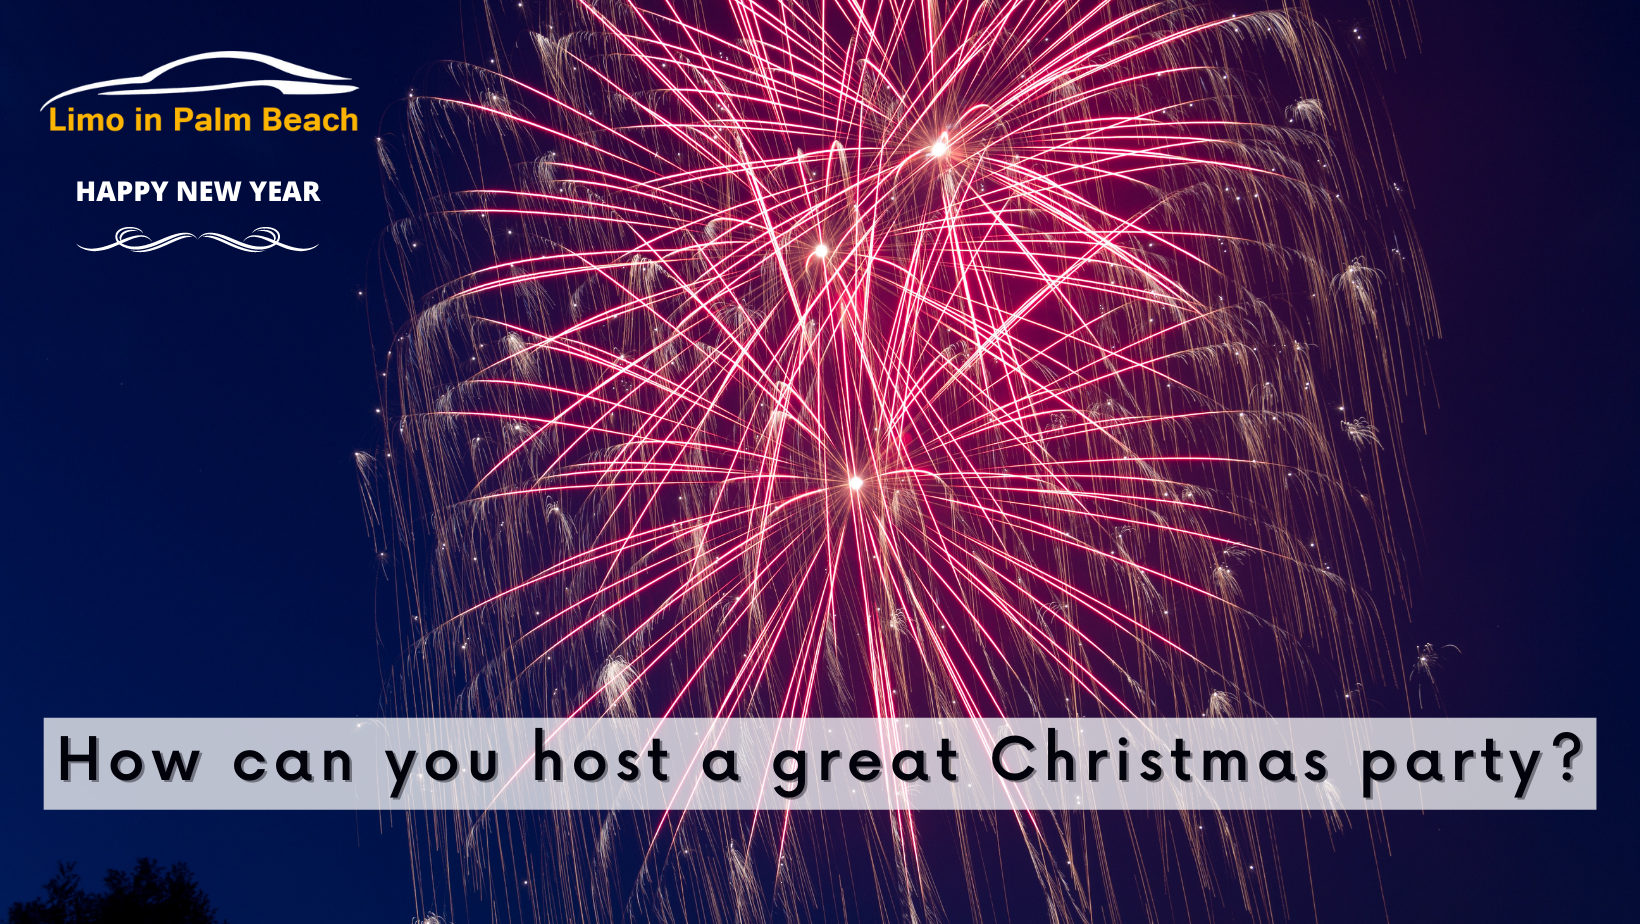 How can you host a great Christmas party?